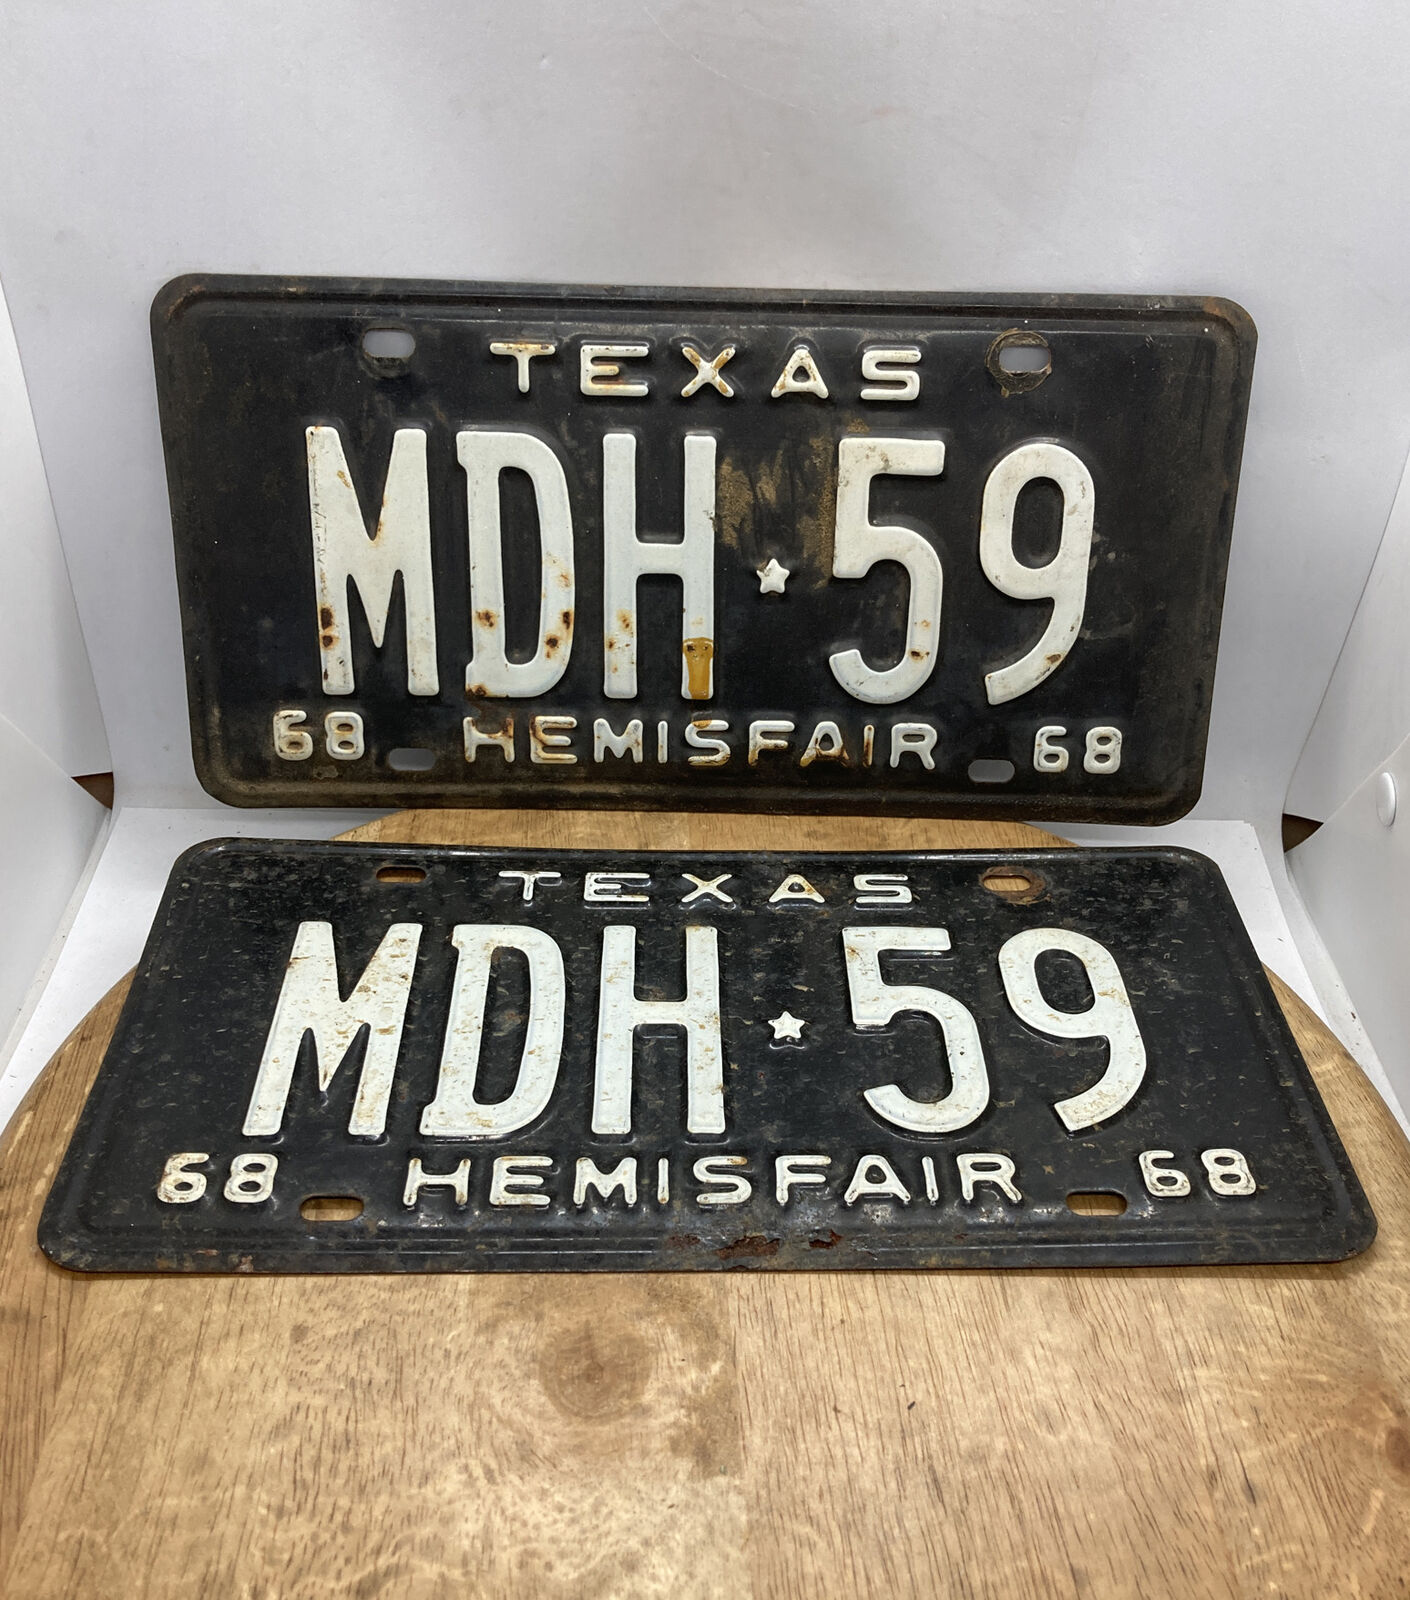 1968 Texas license plate pair MDH59 Expired As Is As Shown Rusty 5 Symbols